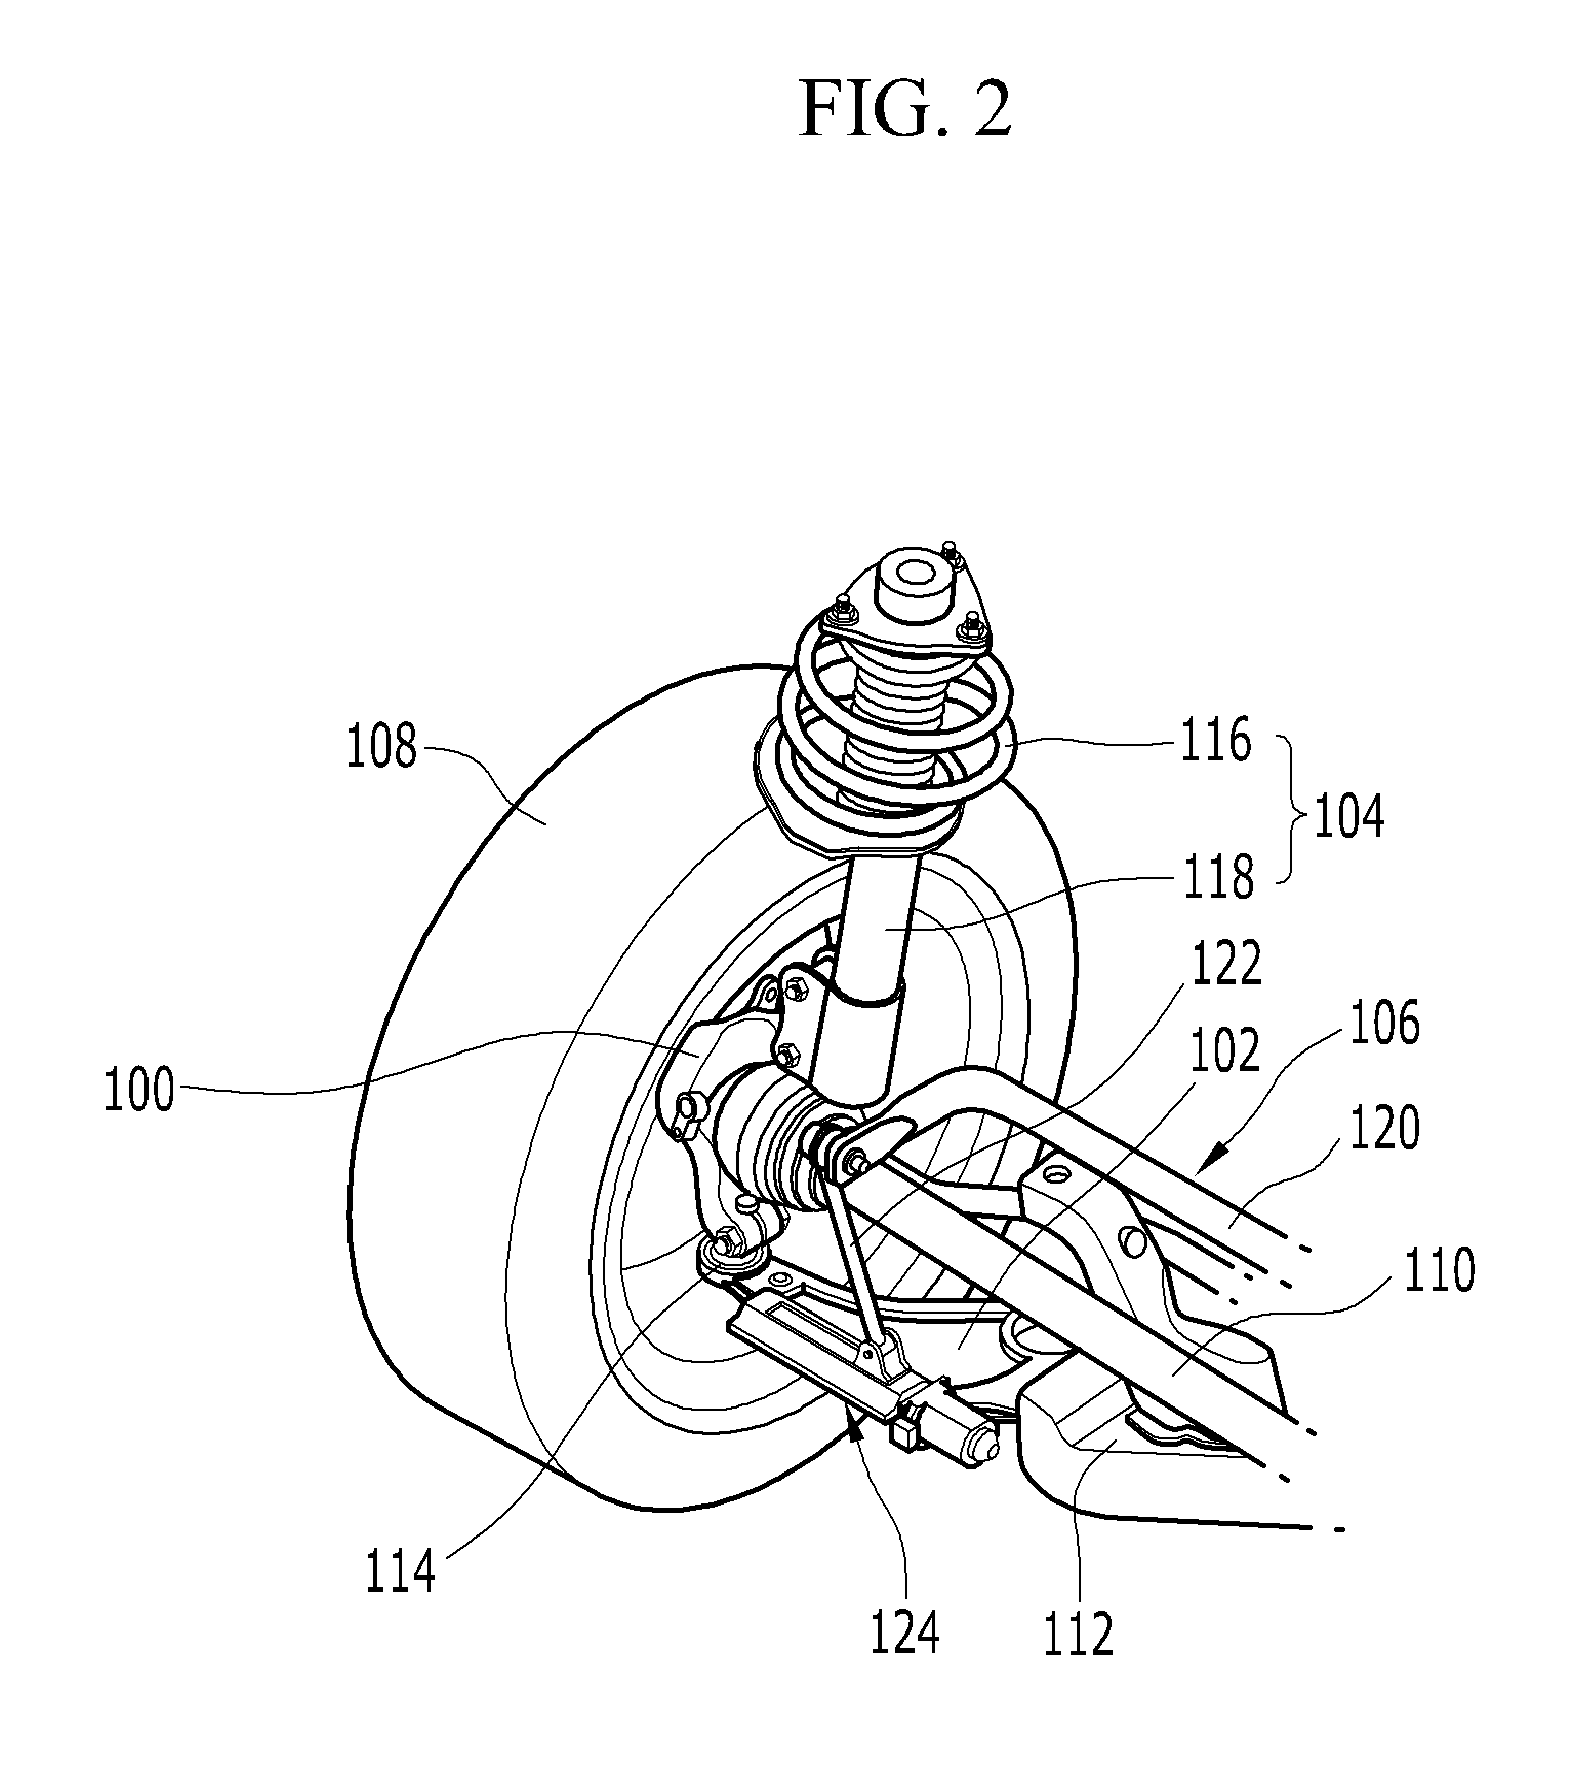 Active roll control system for vehicle